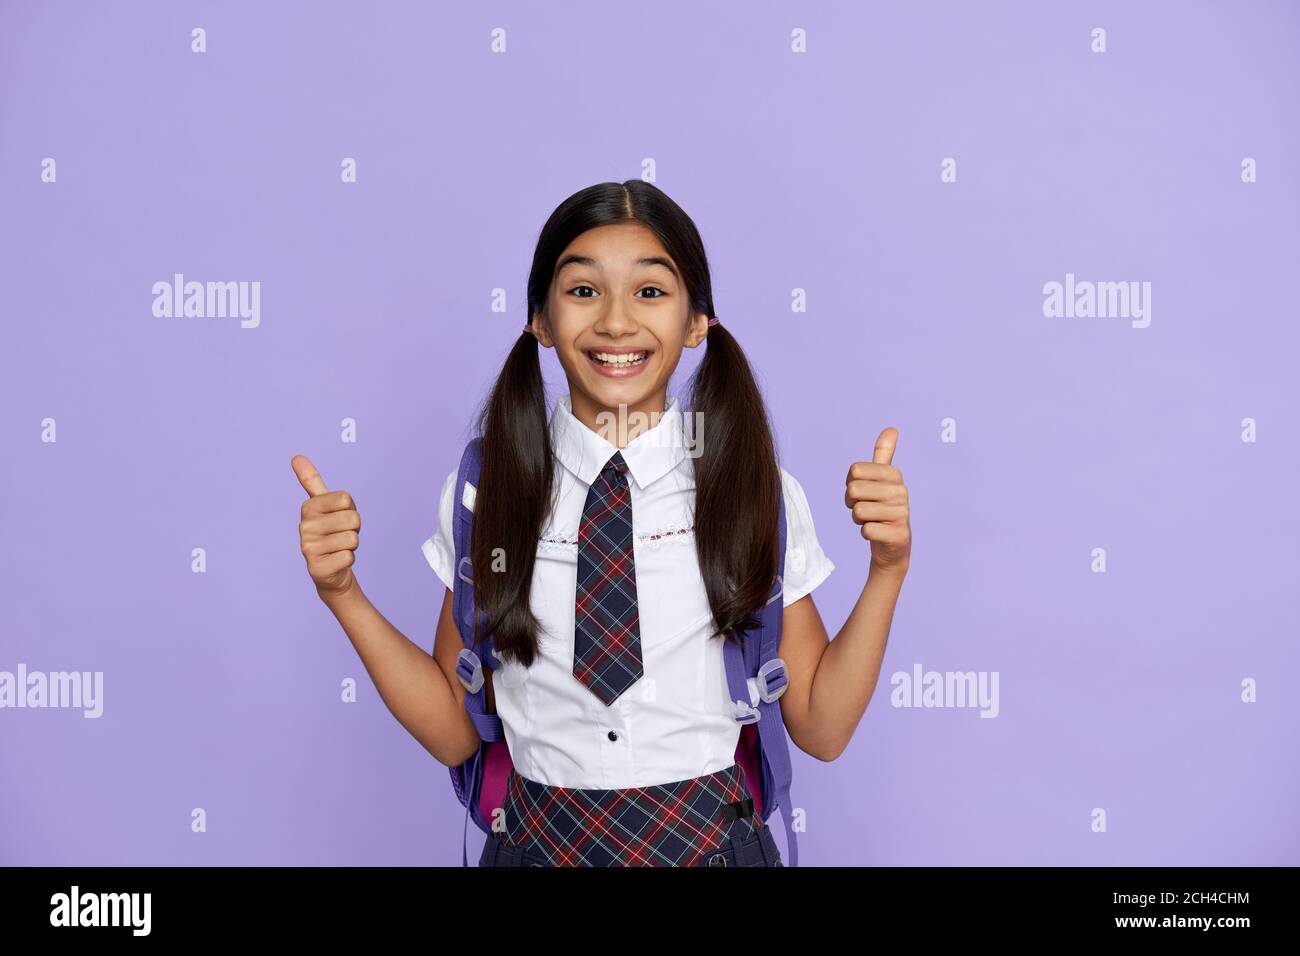 Excited happy indian school girl show thumbs up isolated on violet background. Stock Photo